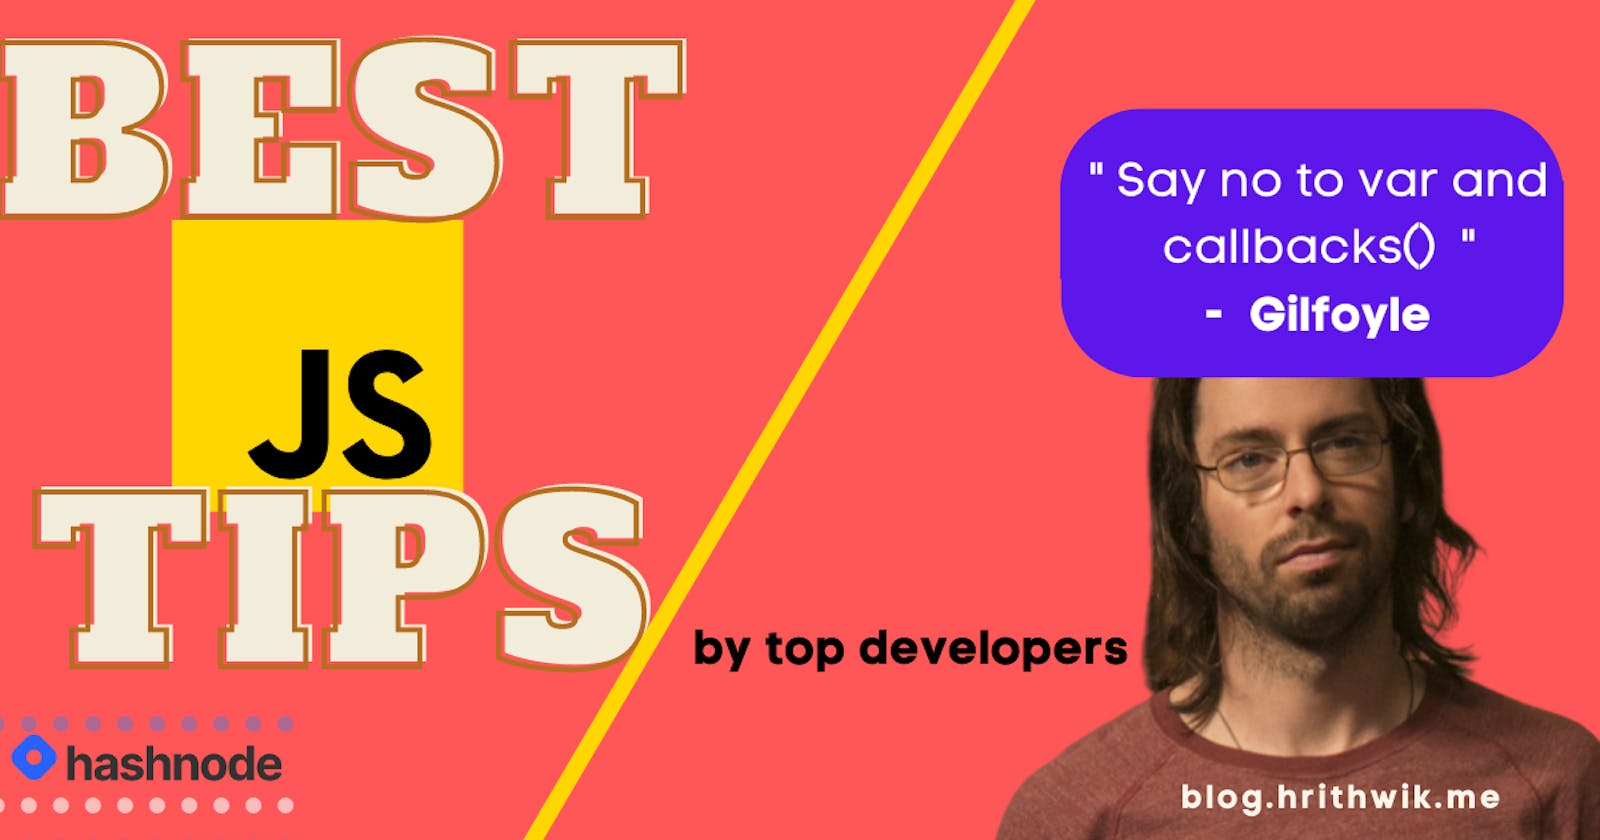 10 best JavaScript practices recommended by Top Developers